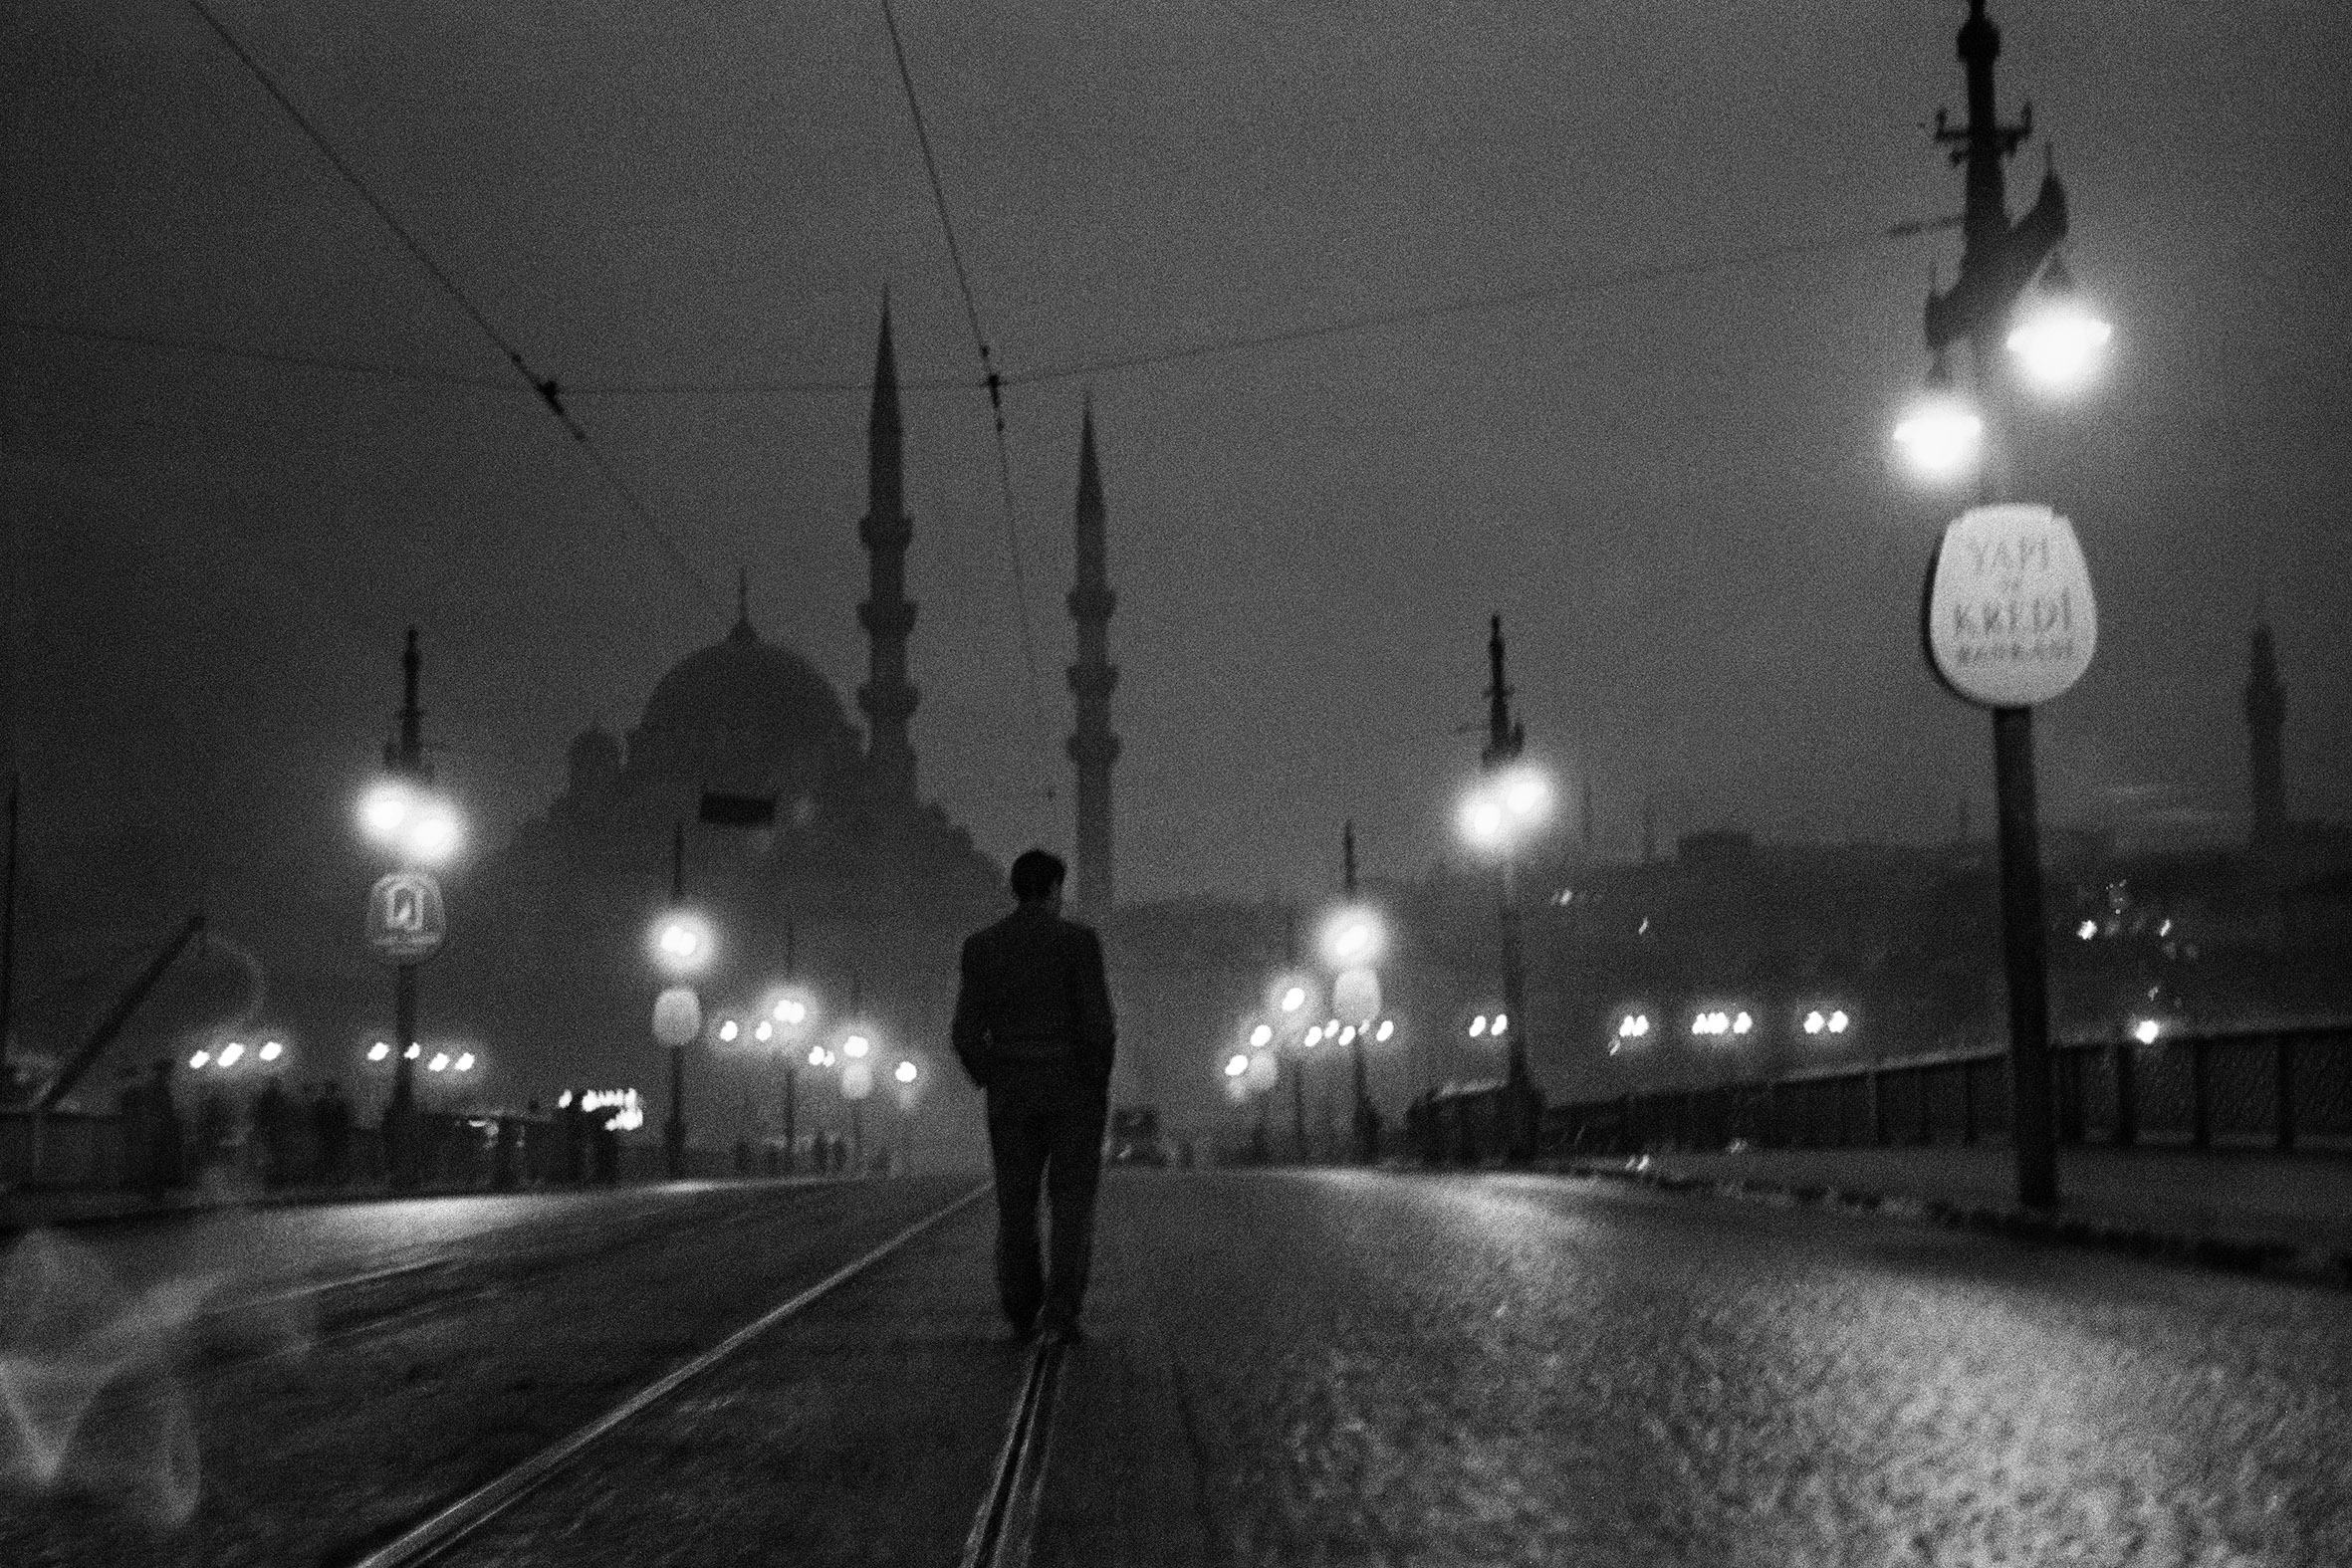 man walkin in instanbul at night with lampposts